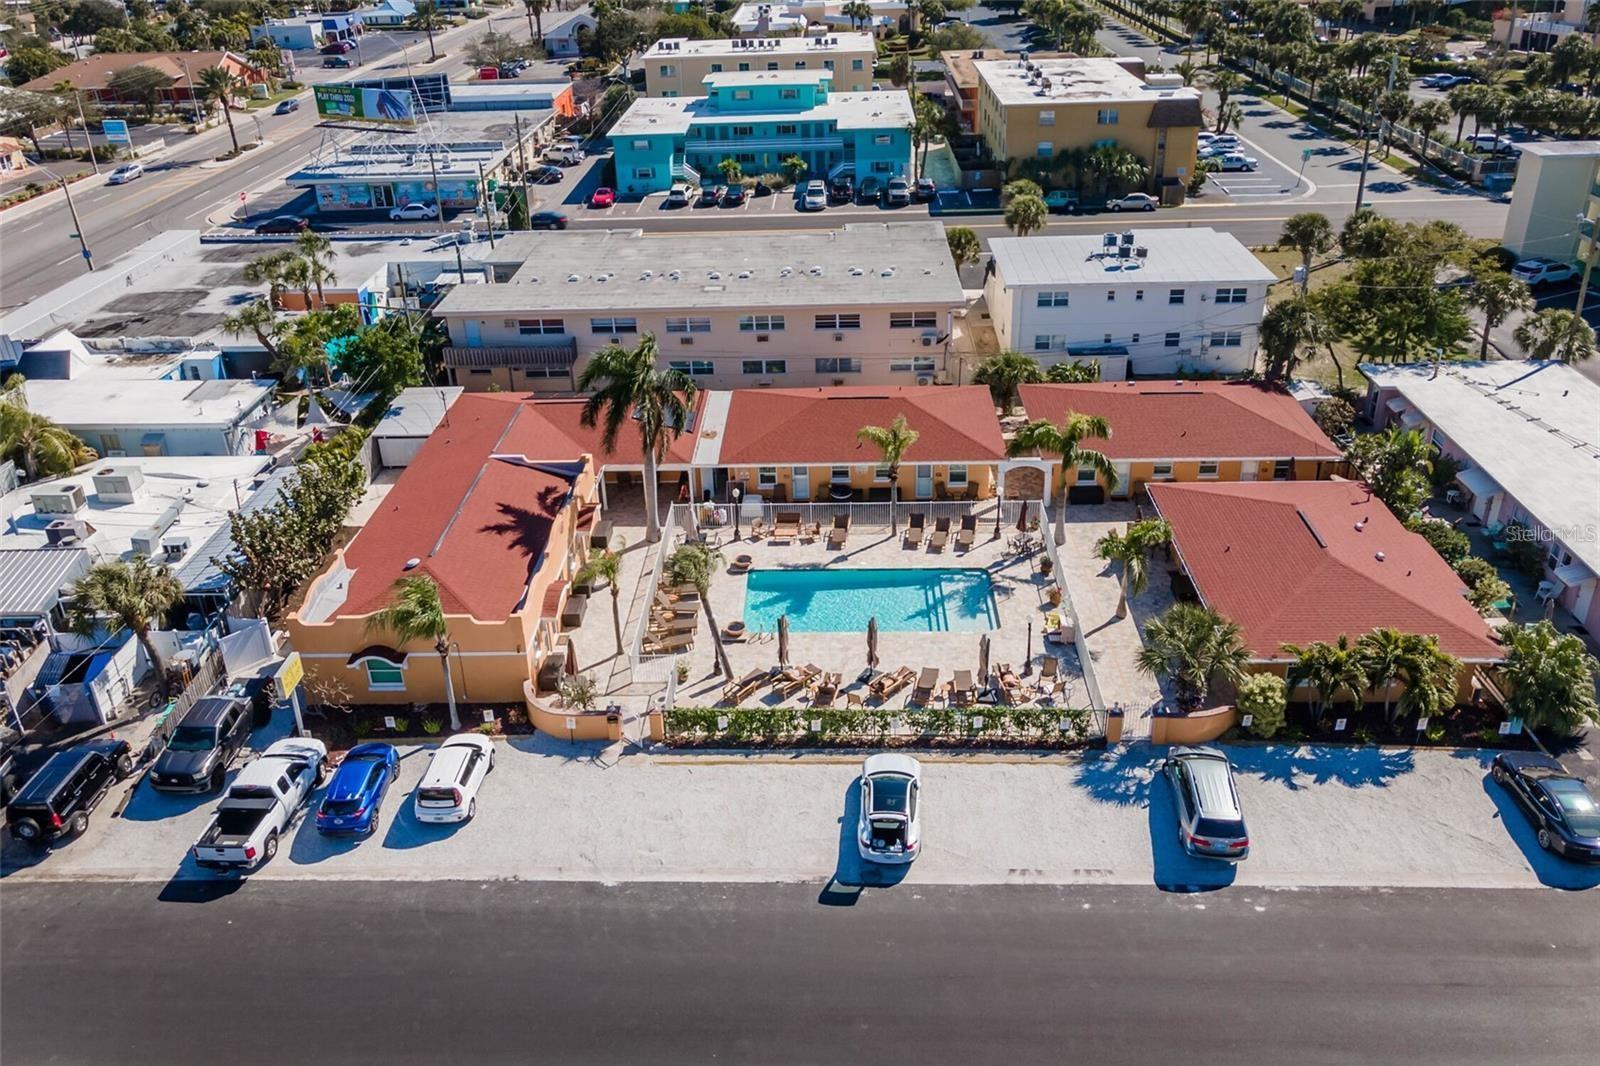 Hotel For Sale next to St.Pete Beach, FL